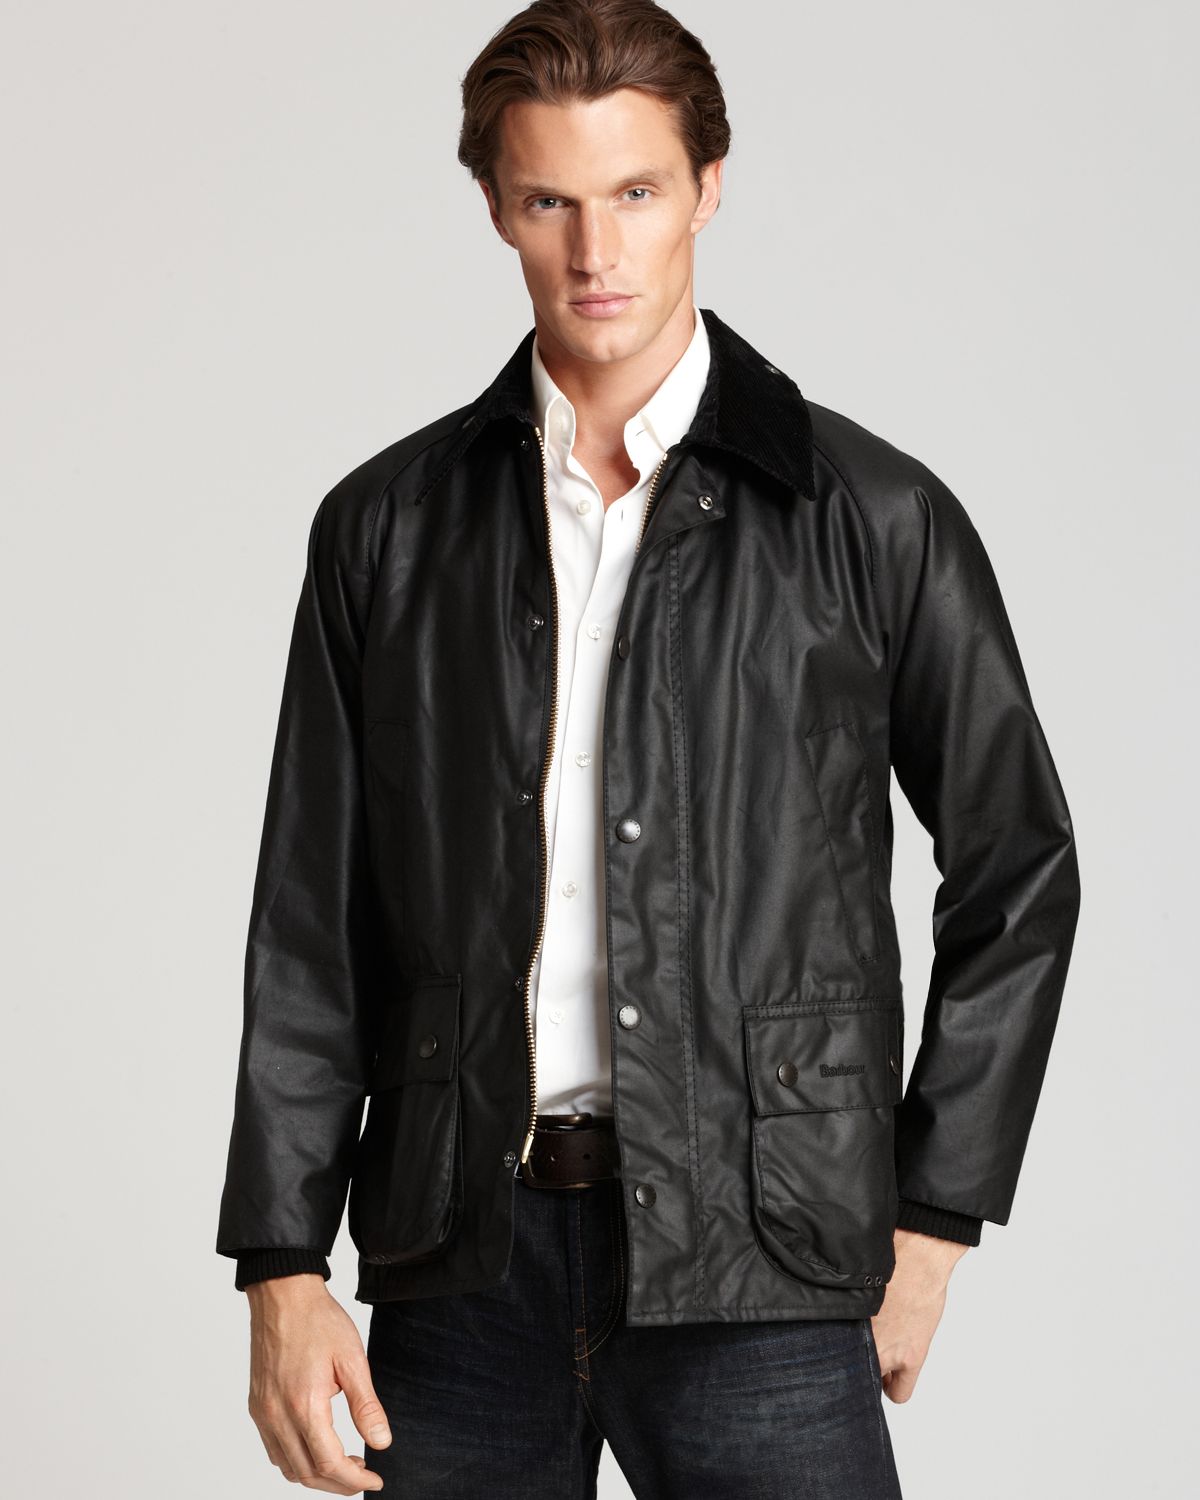 Barbour Classic Bedale Waxed Cotton Coat in Black for Men - Lyst